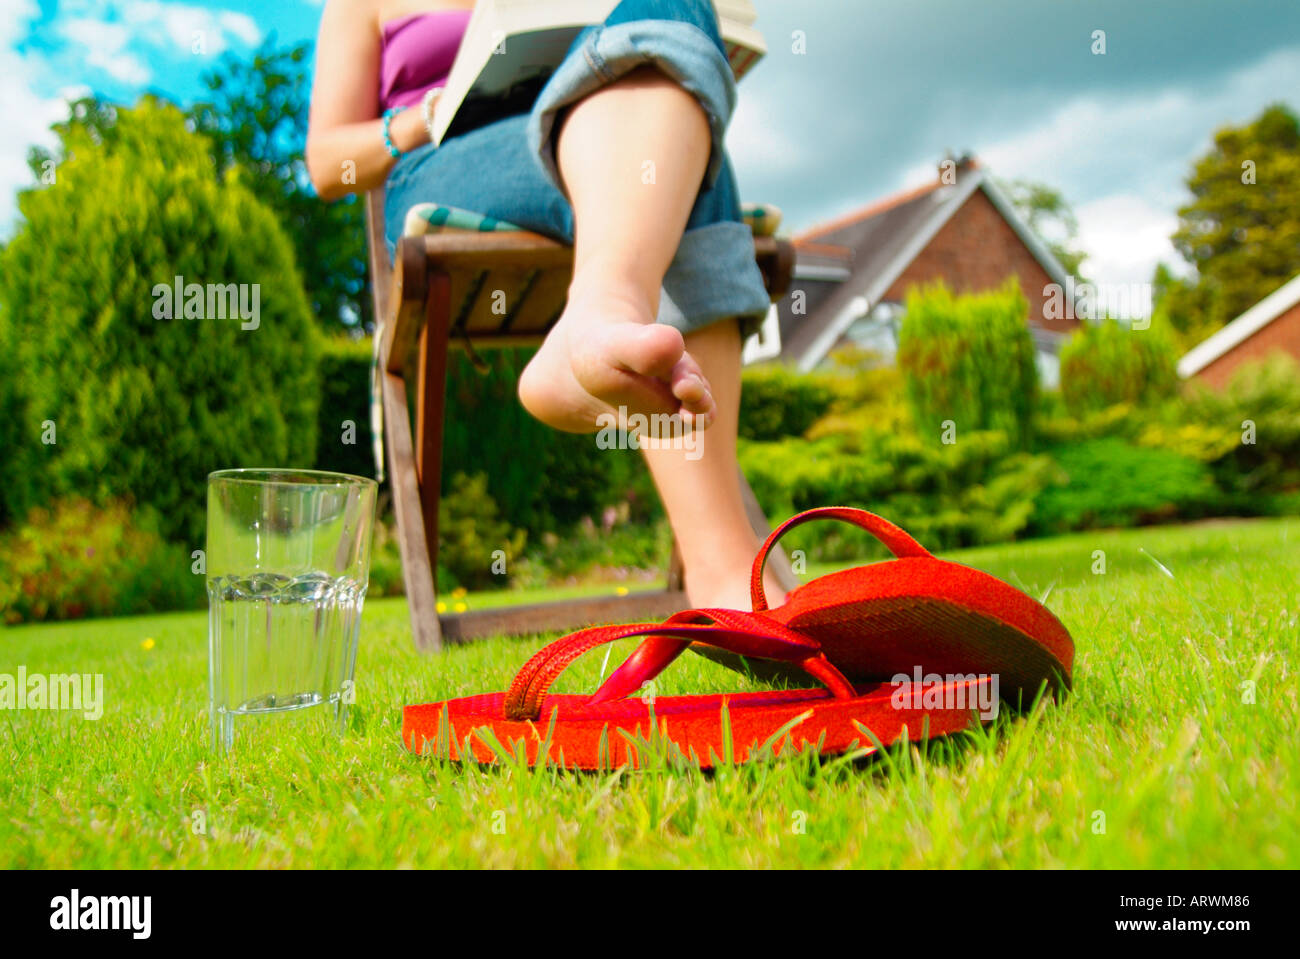 Woman sitting on deck chair in garden with shoes on grass Stock Photo